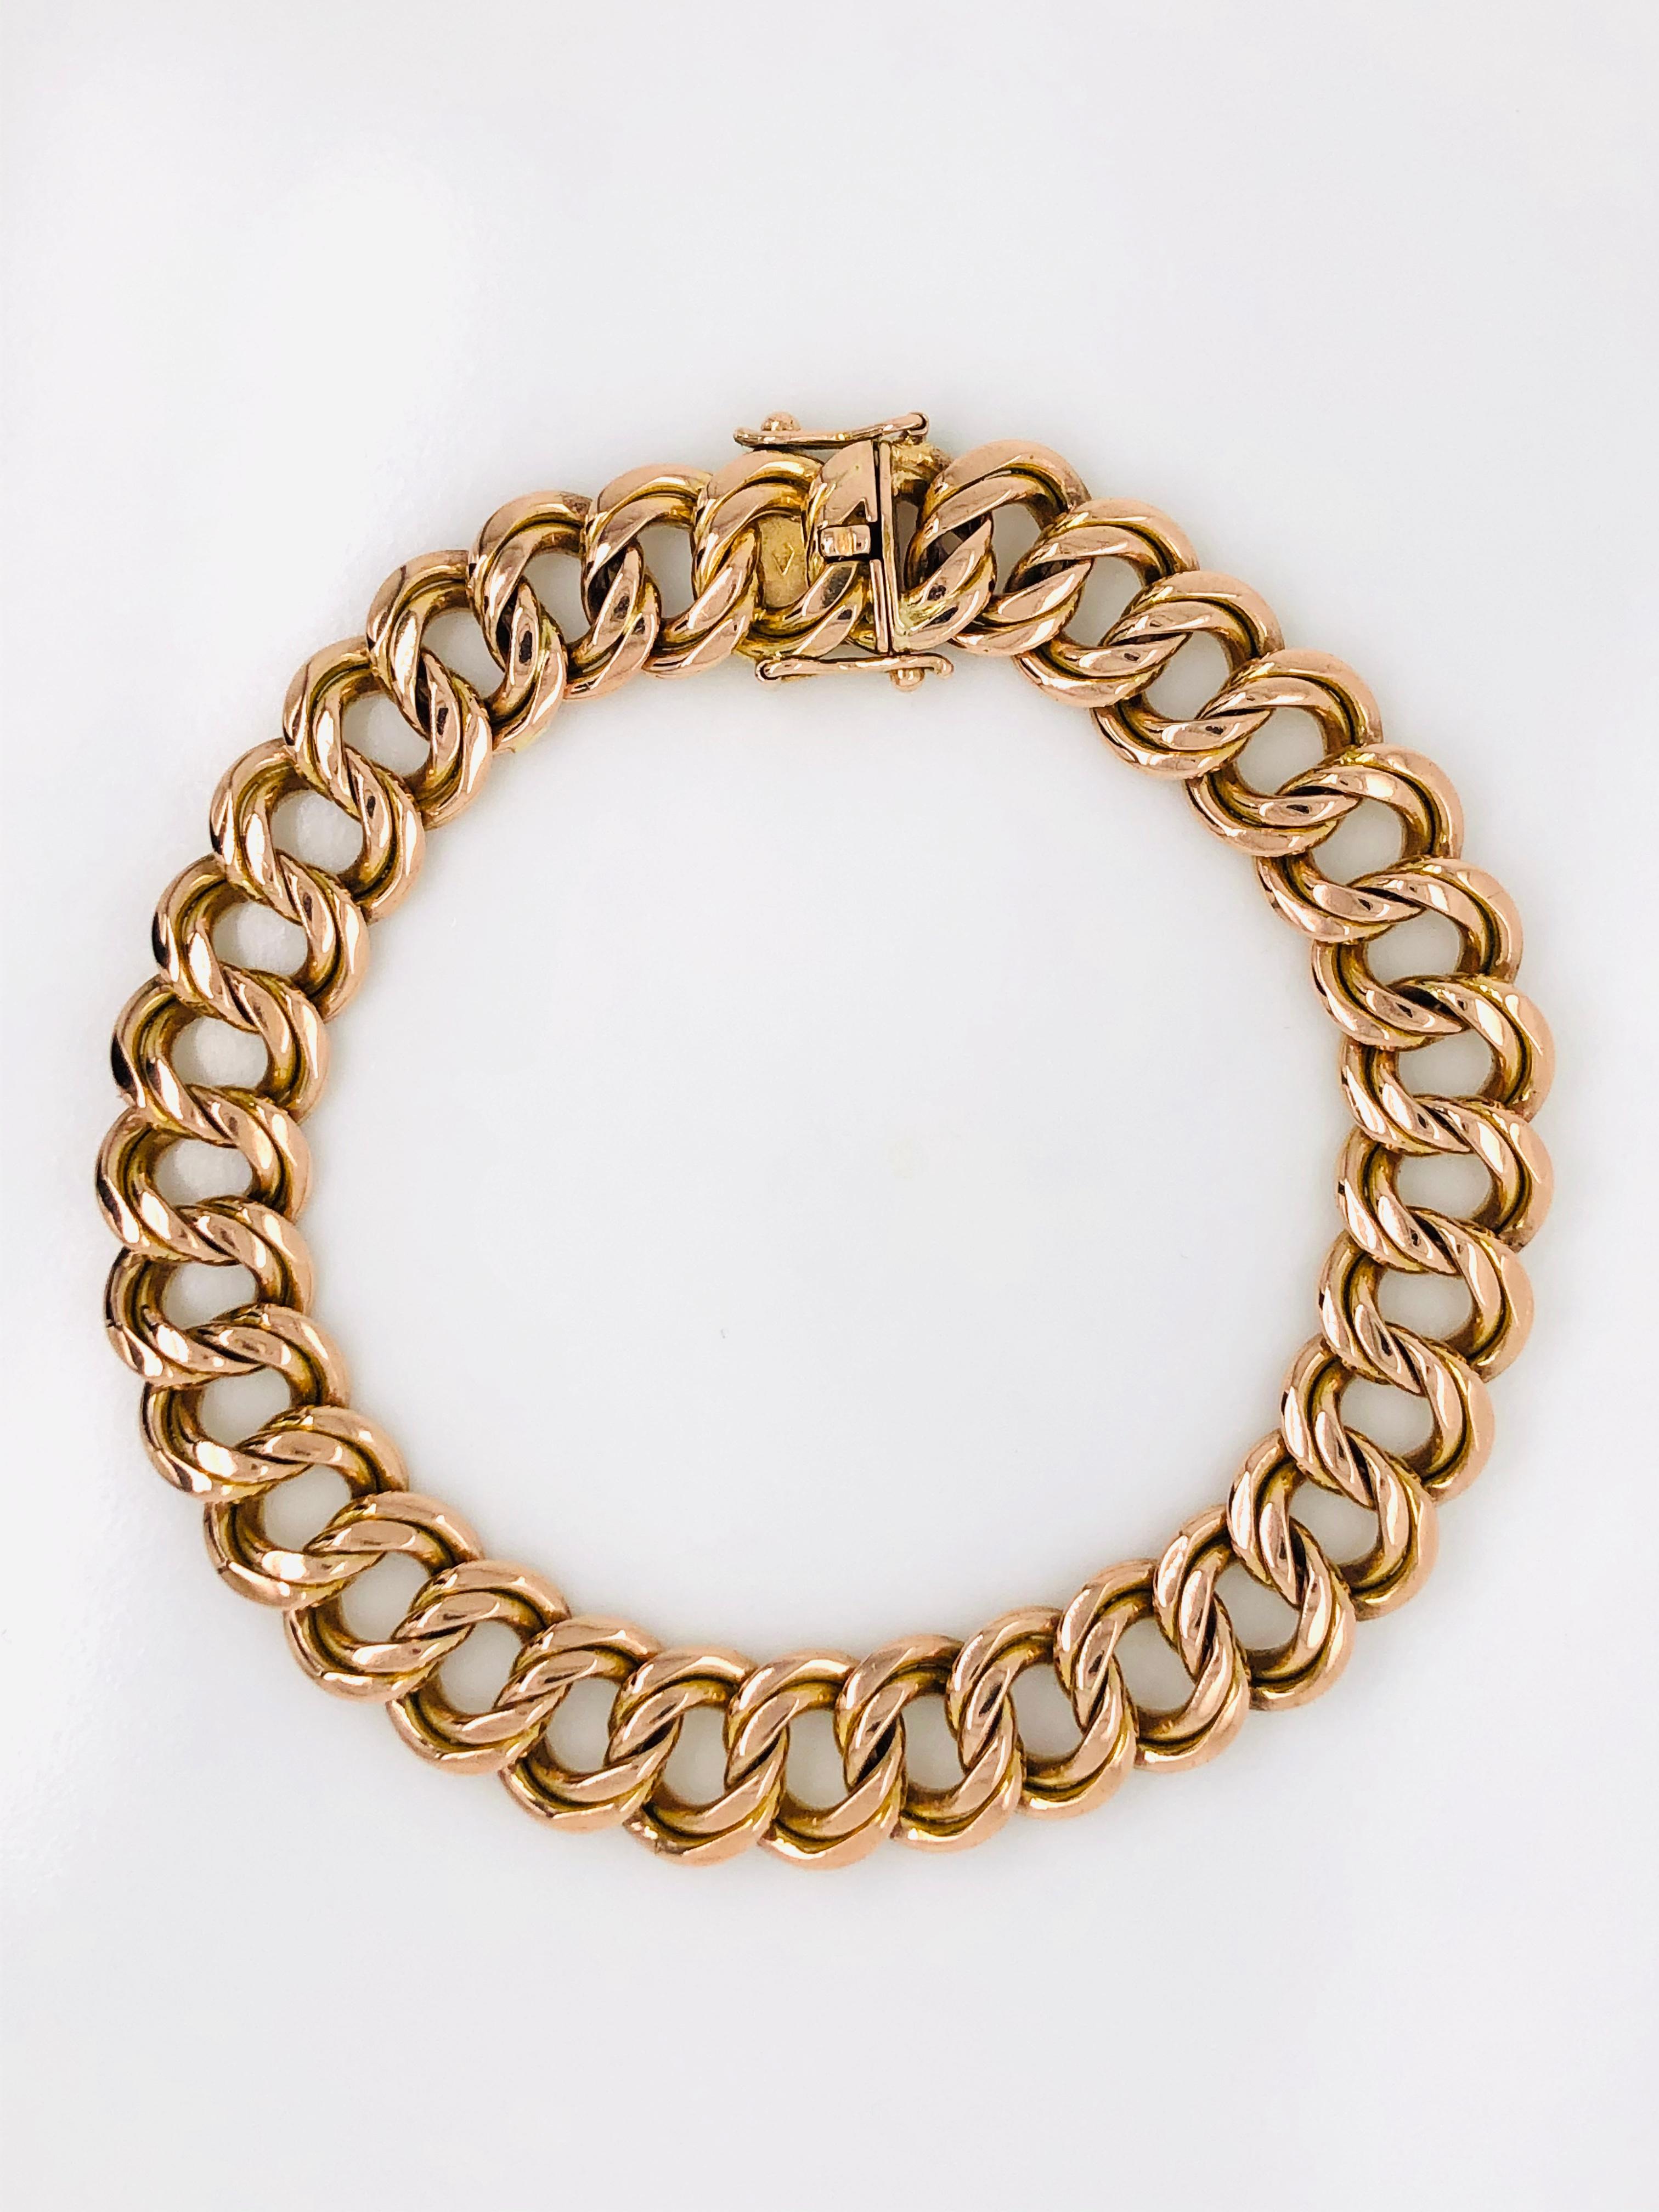 Rose Gold 18k American Mesh Bracelet
Weight Of Gold : 39.63 grams 
Longueur : 20 cm 
Security Clasp